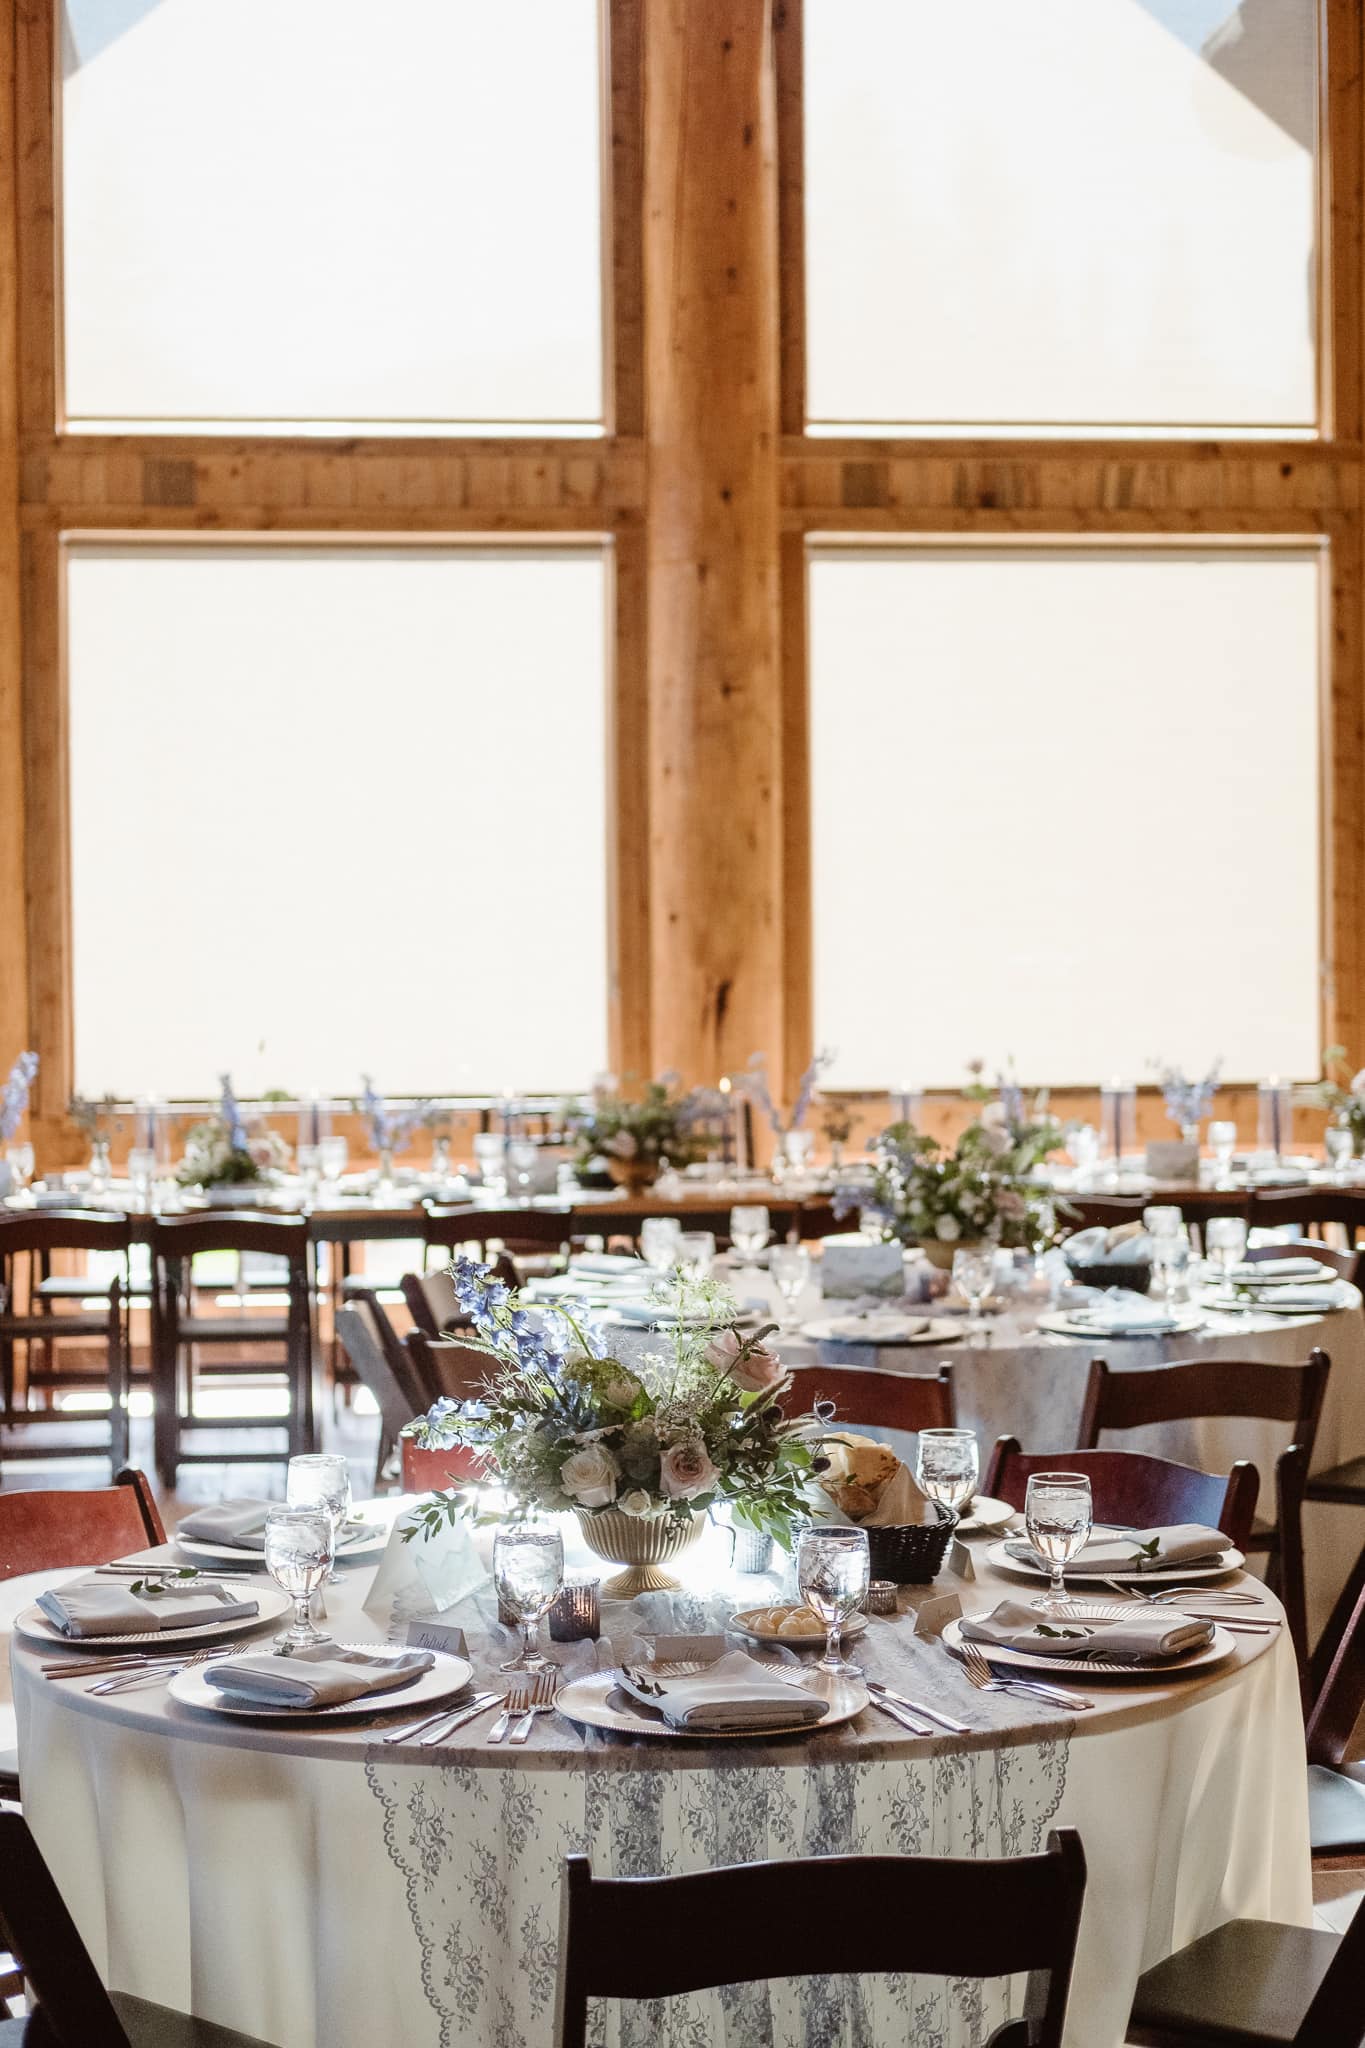 Breckenridge Nordic Center reception details with flowers by Flora by Nora, stationery by Cheree Berry Paper, Summit County wedding photographer, Colorado wedding